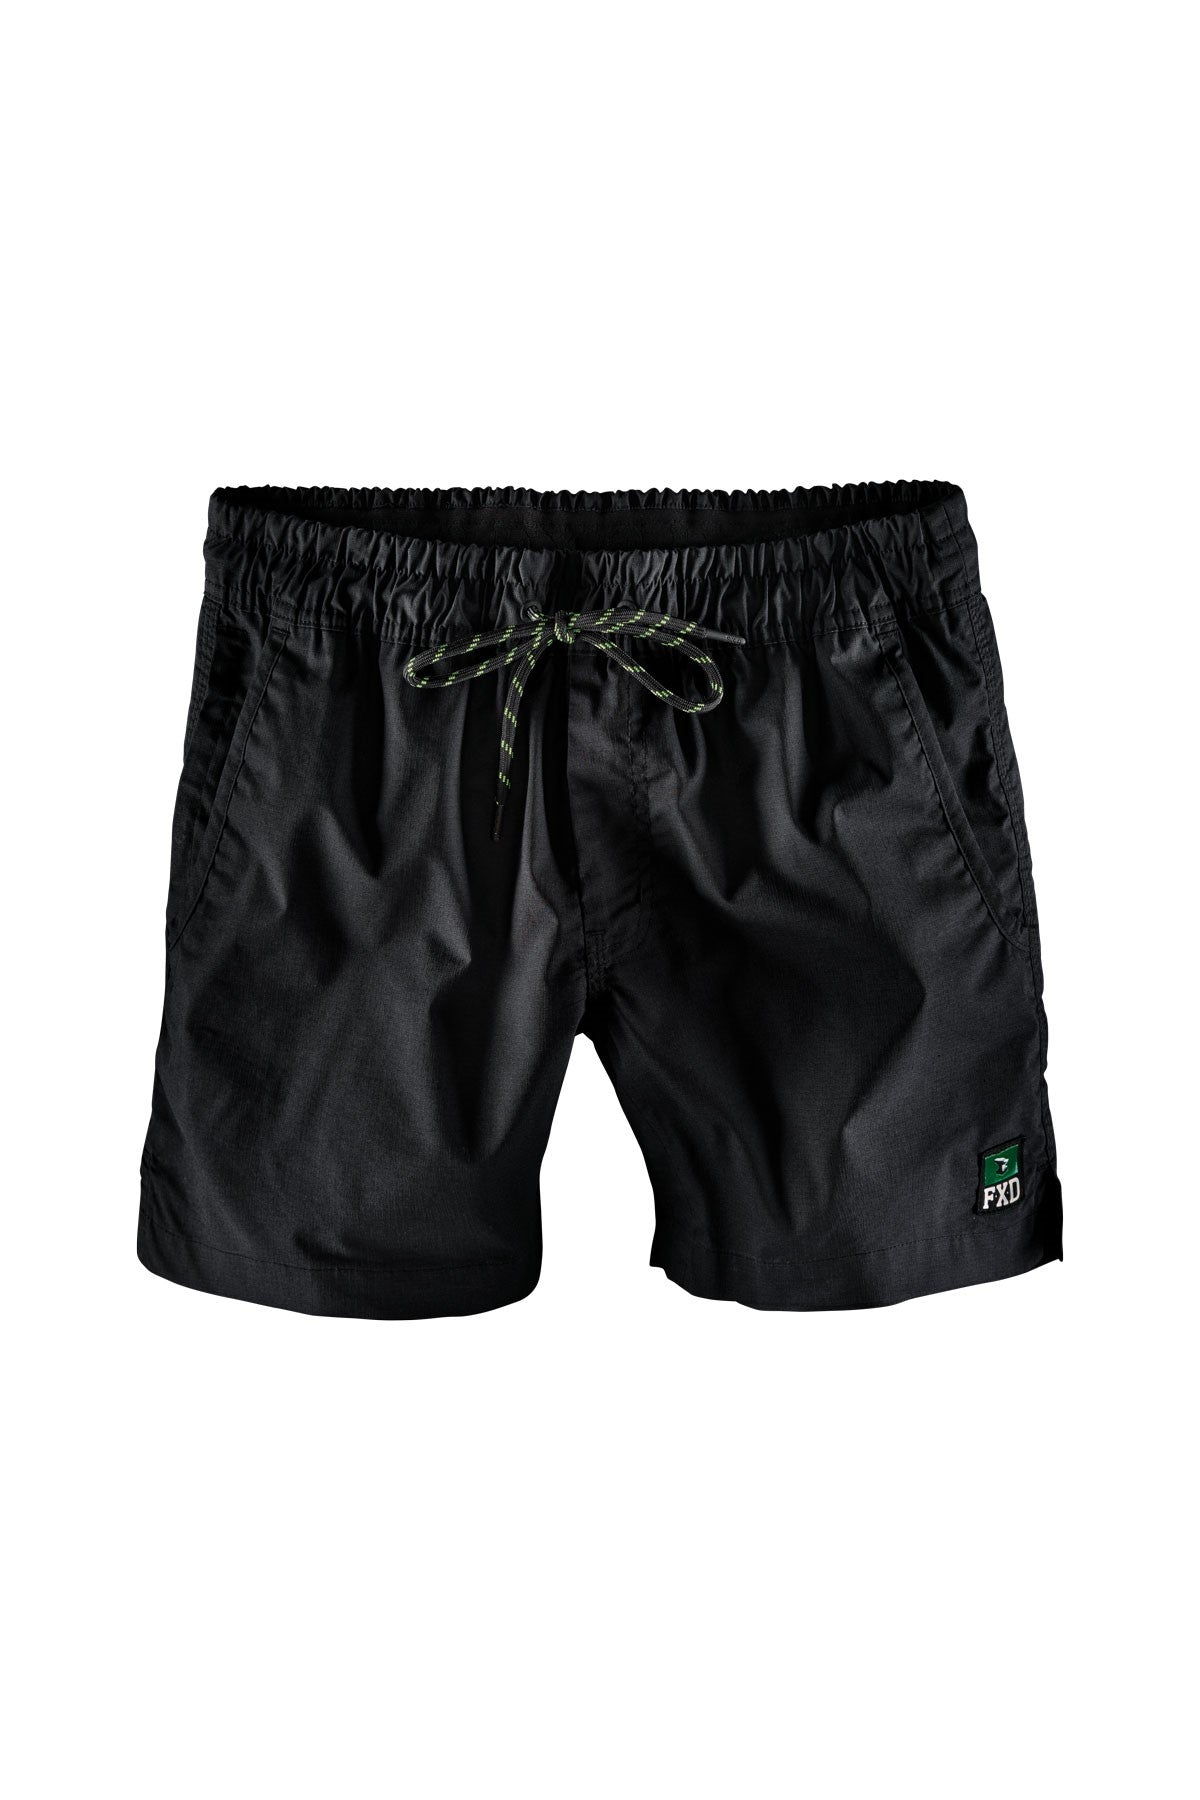 FXD- WS-4 Repreve® recycled polyester stretch ripstop Short